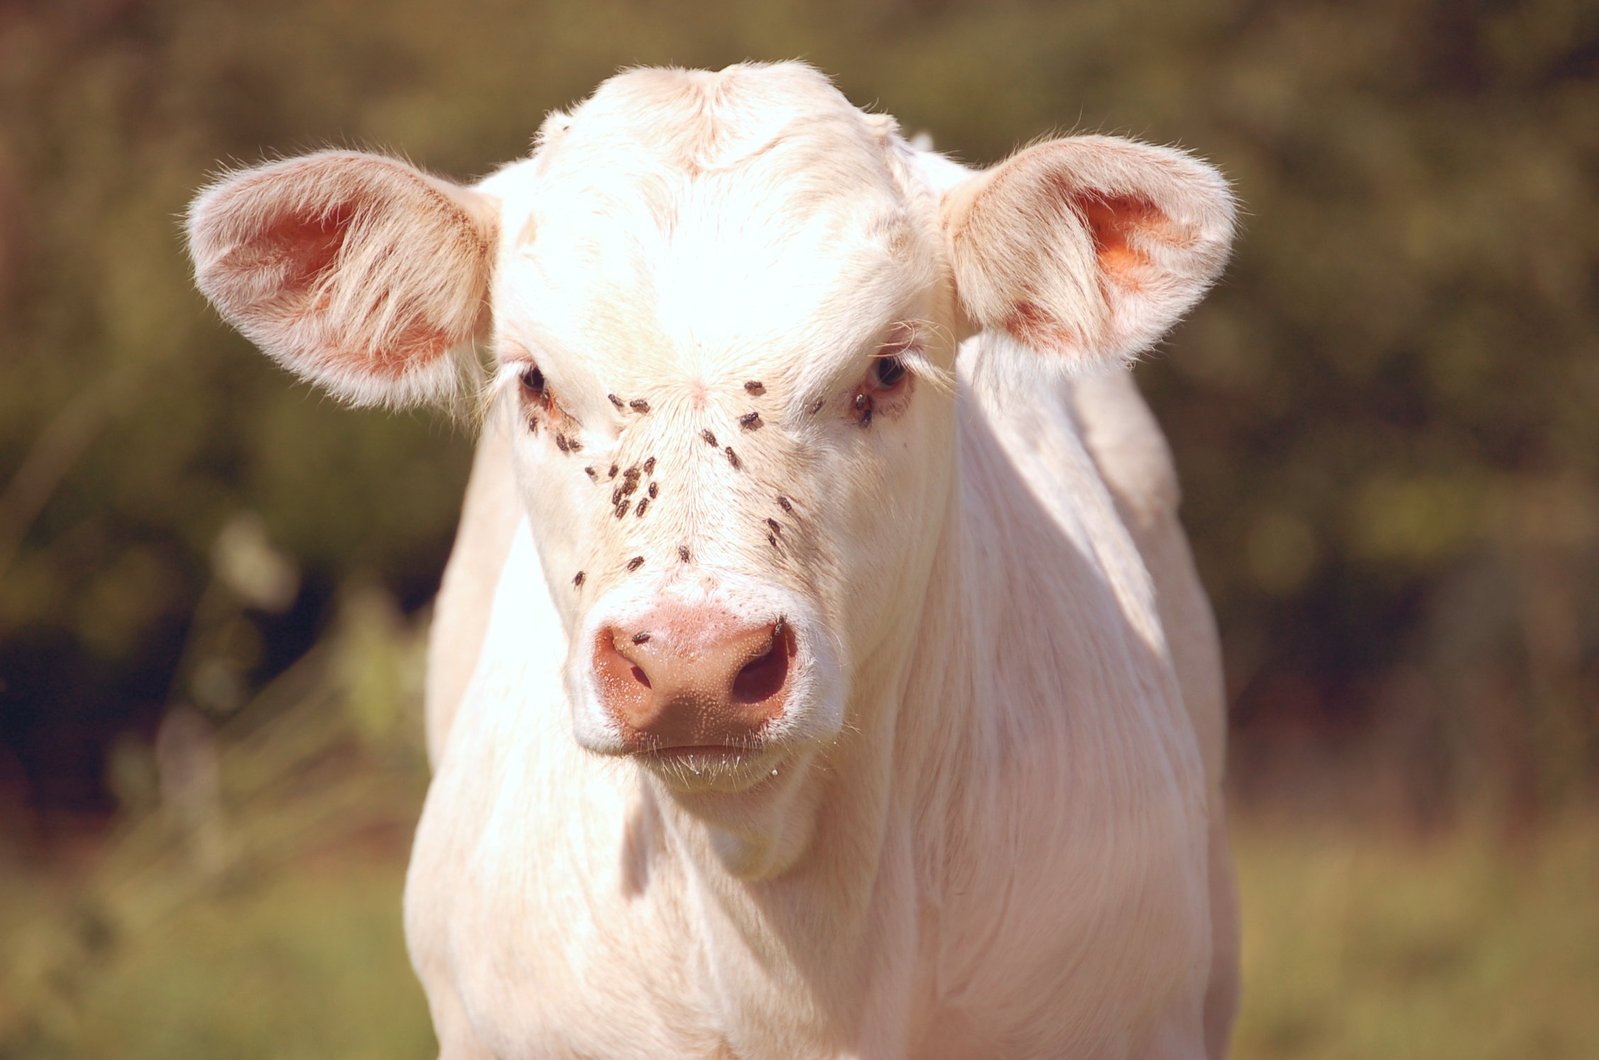 closeup of a white cow's face with bush in background